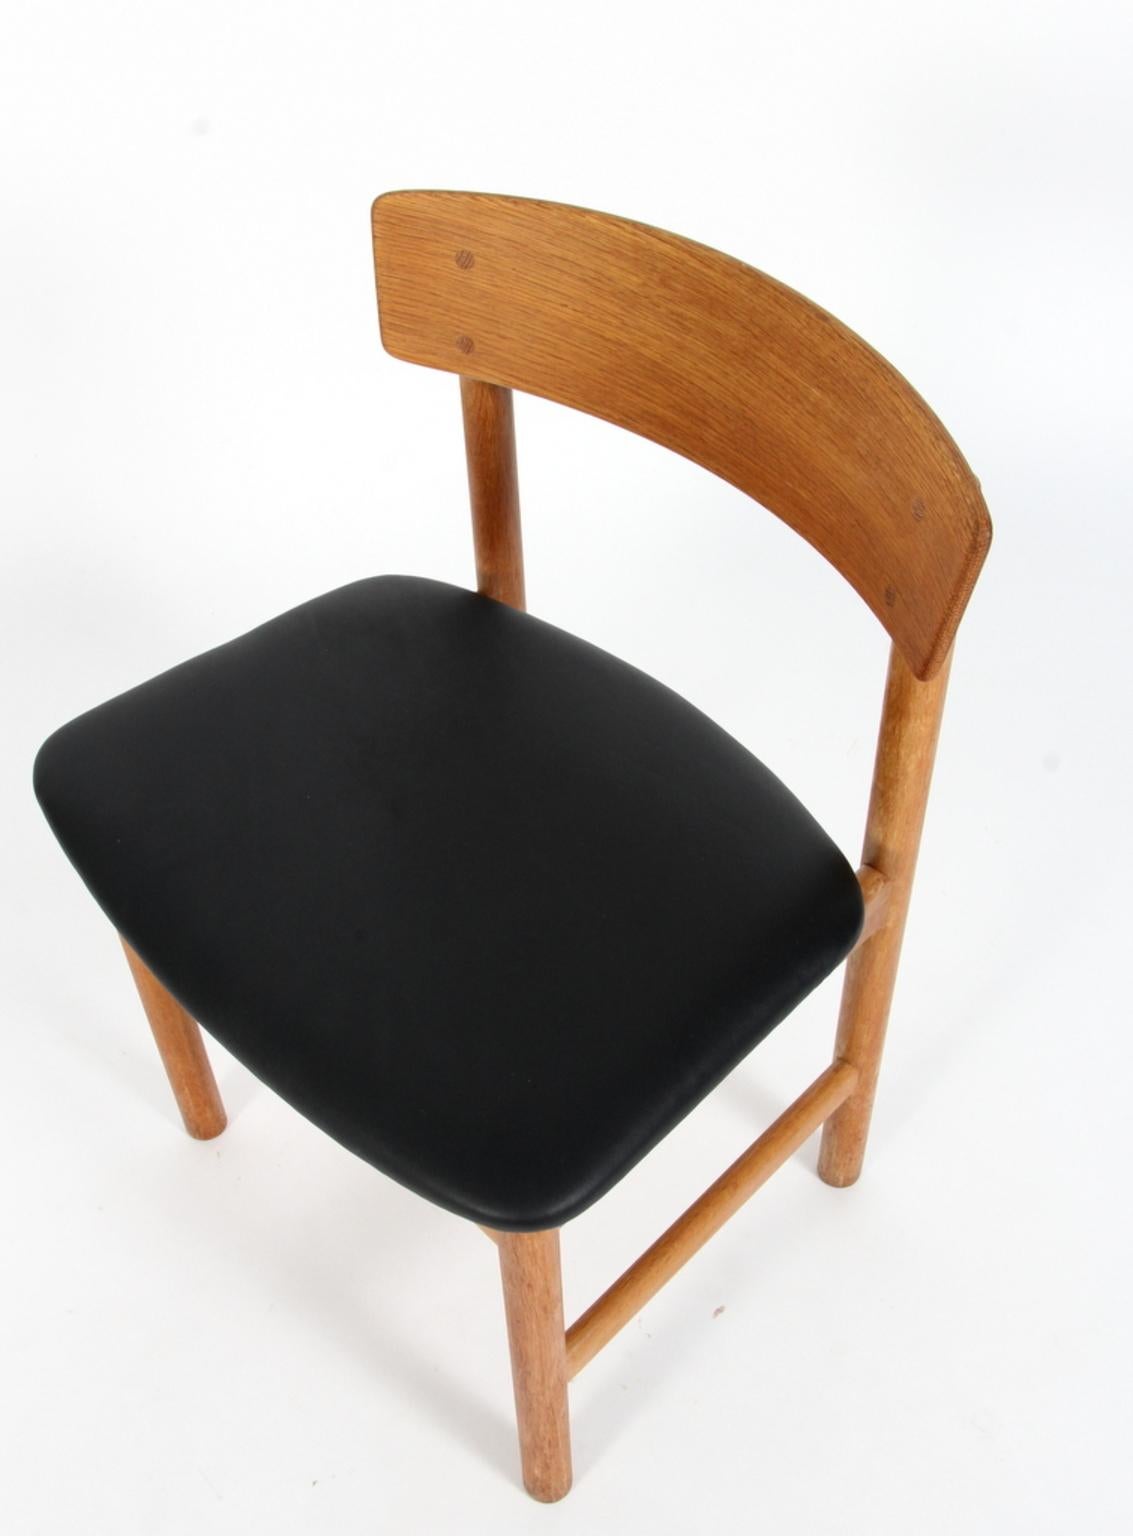 Børge Mogensen dining chairs made of massive oak and new upholstered with black Nevada aniline leather.

Model 3236, made by Fredericia Furniture.